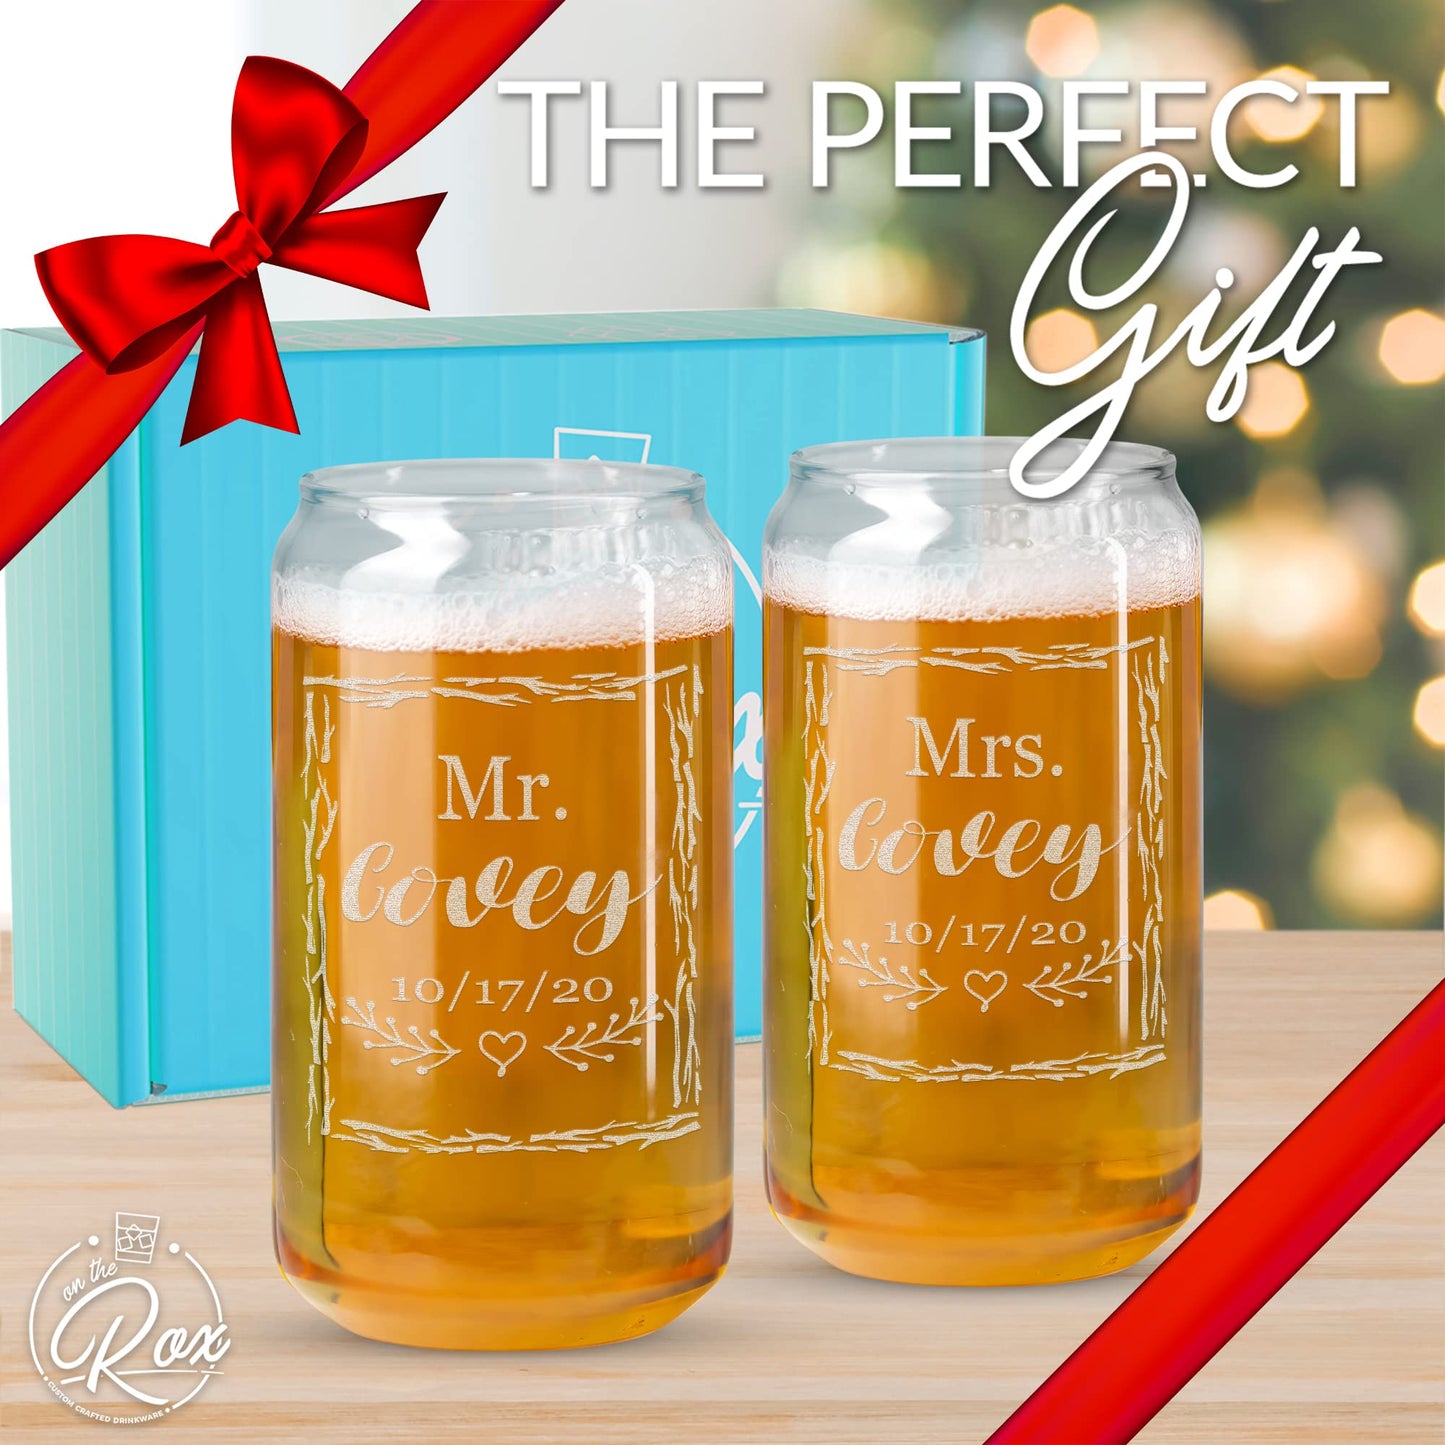 Two Custom Engraved Beer Can Glasses, For the Bride and Groom, Mr. And Mrs. Last Name Wedding Date Rustic Gift for Couple, His And Hers, Anniversary Present, Customized Glassware for Outdoor Reception